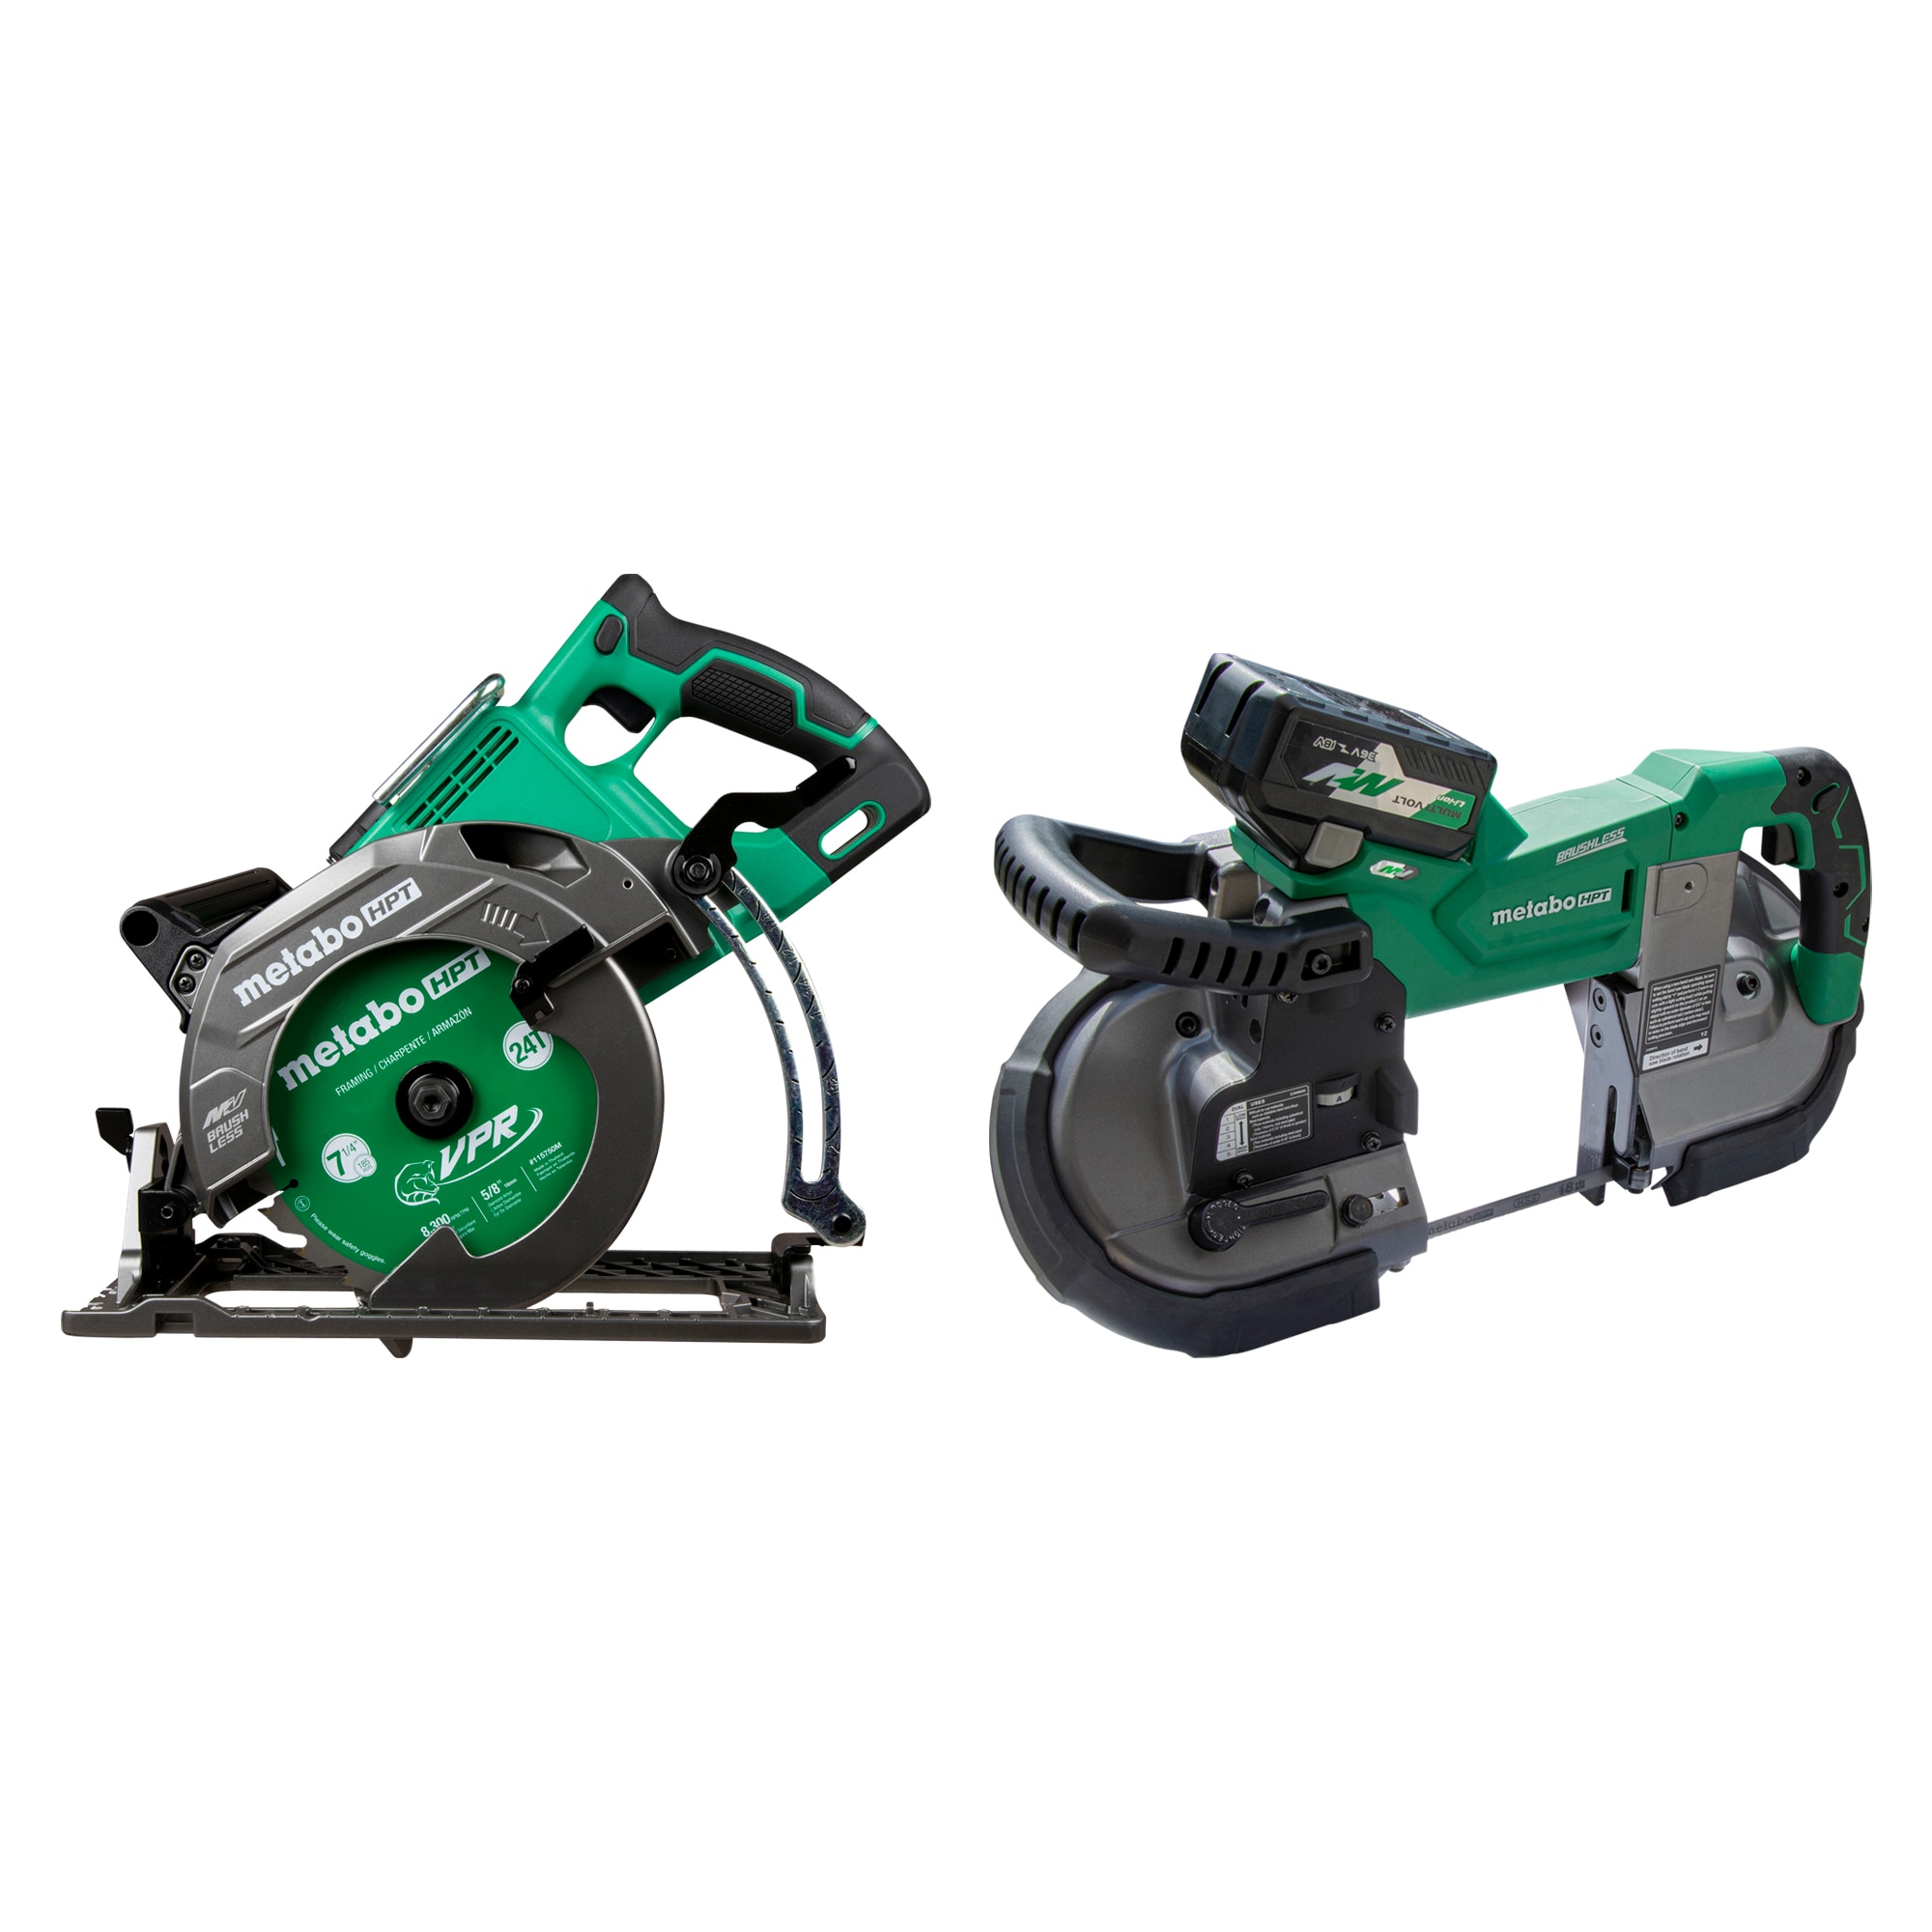 Metabo HPT MultiVolt 36-Volt 7-1/4-in Brushless Cordless Rear Handle Circular Saw with MultiVolt 36-Volt 5-in Portable Band Saw